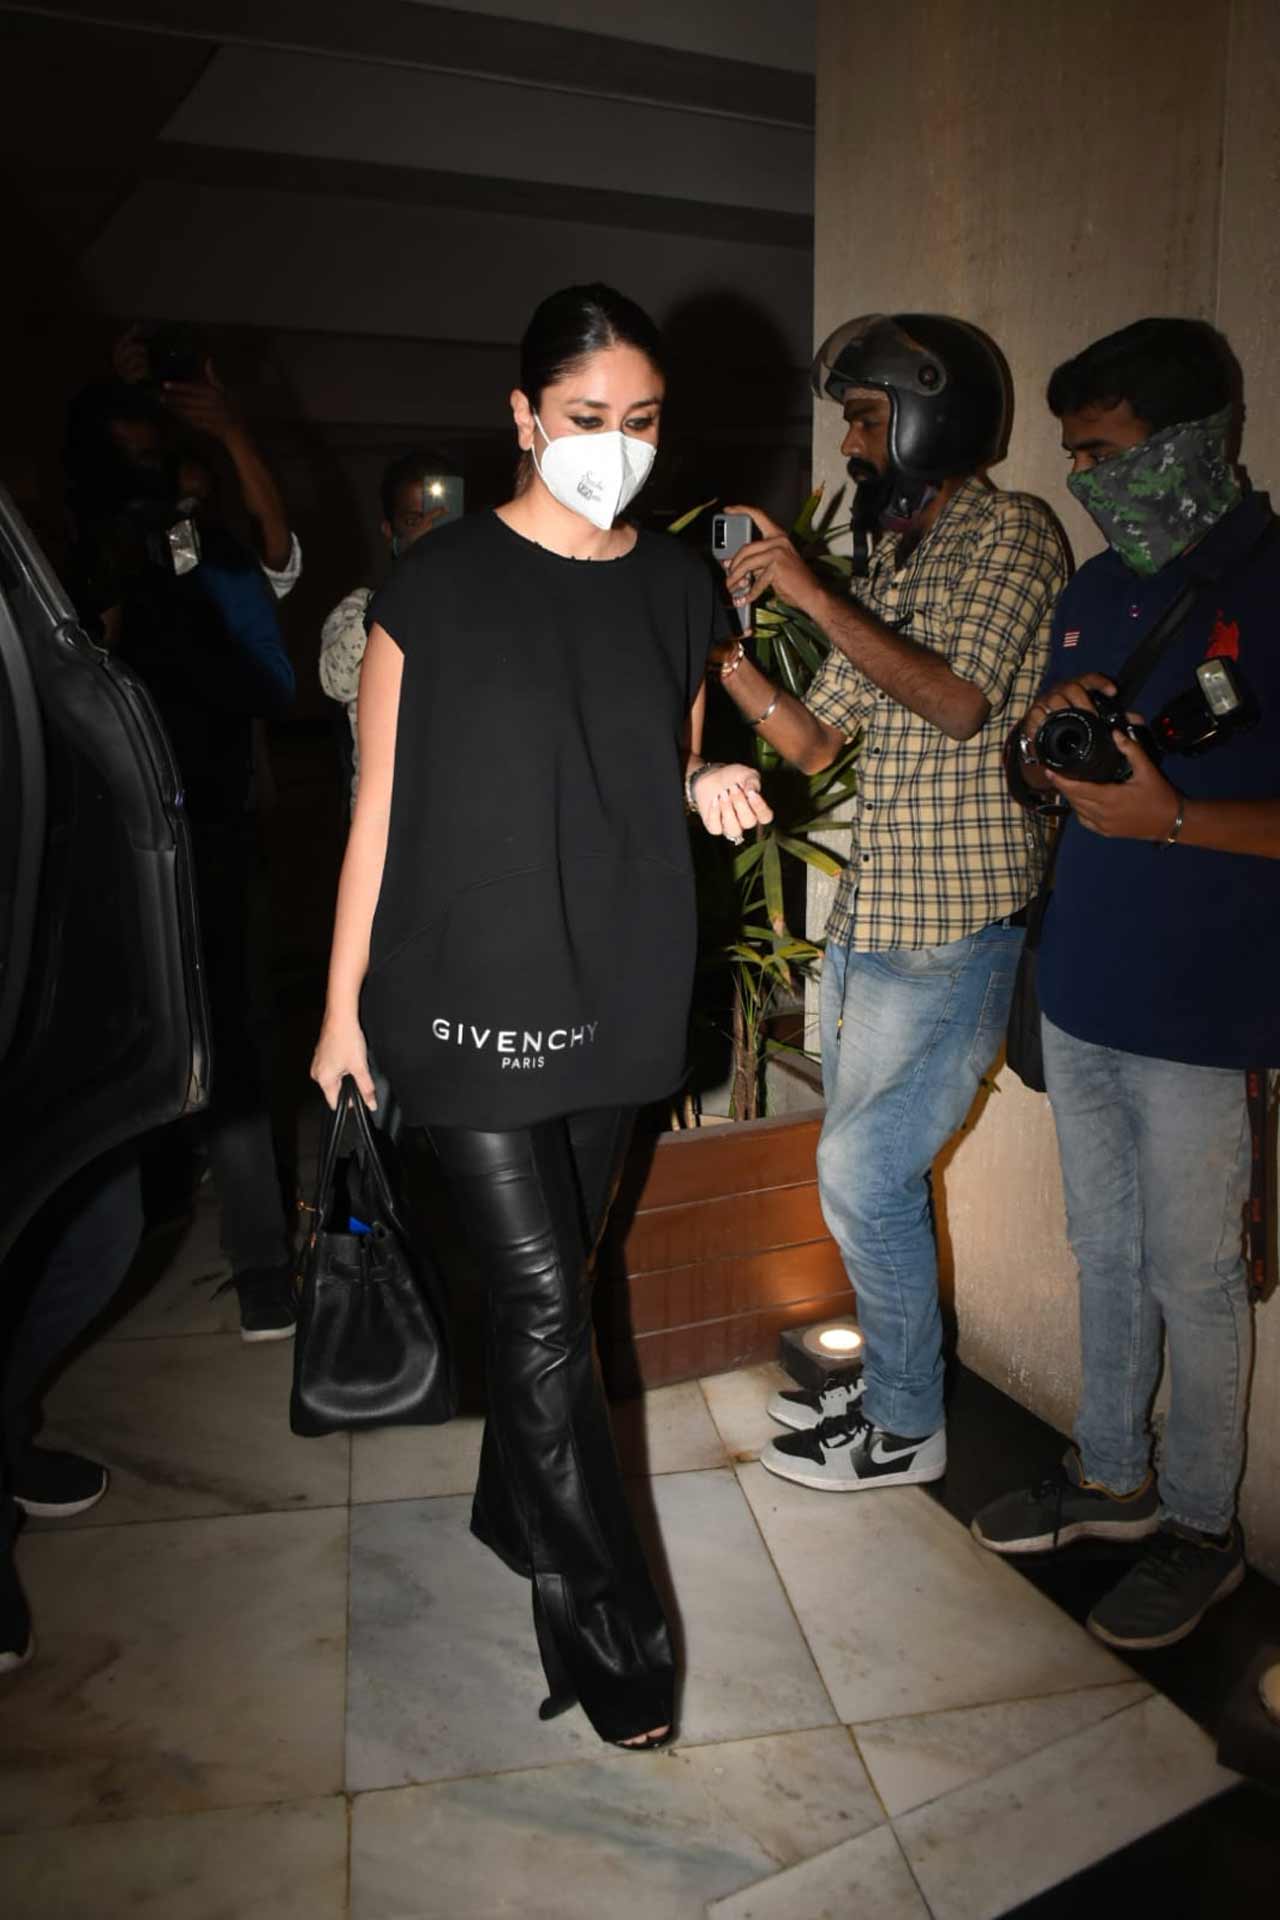 Kareena Kapoor stunned in black leather pants, paired with a black basic tee during the outing. On the other hand, Malaika Arora was seen twinning with her BFF in all-black casual wear.